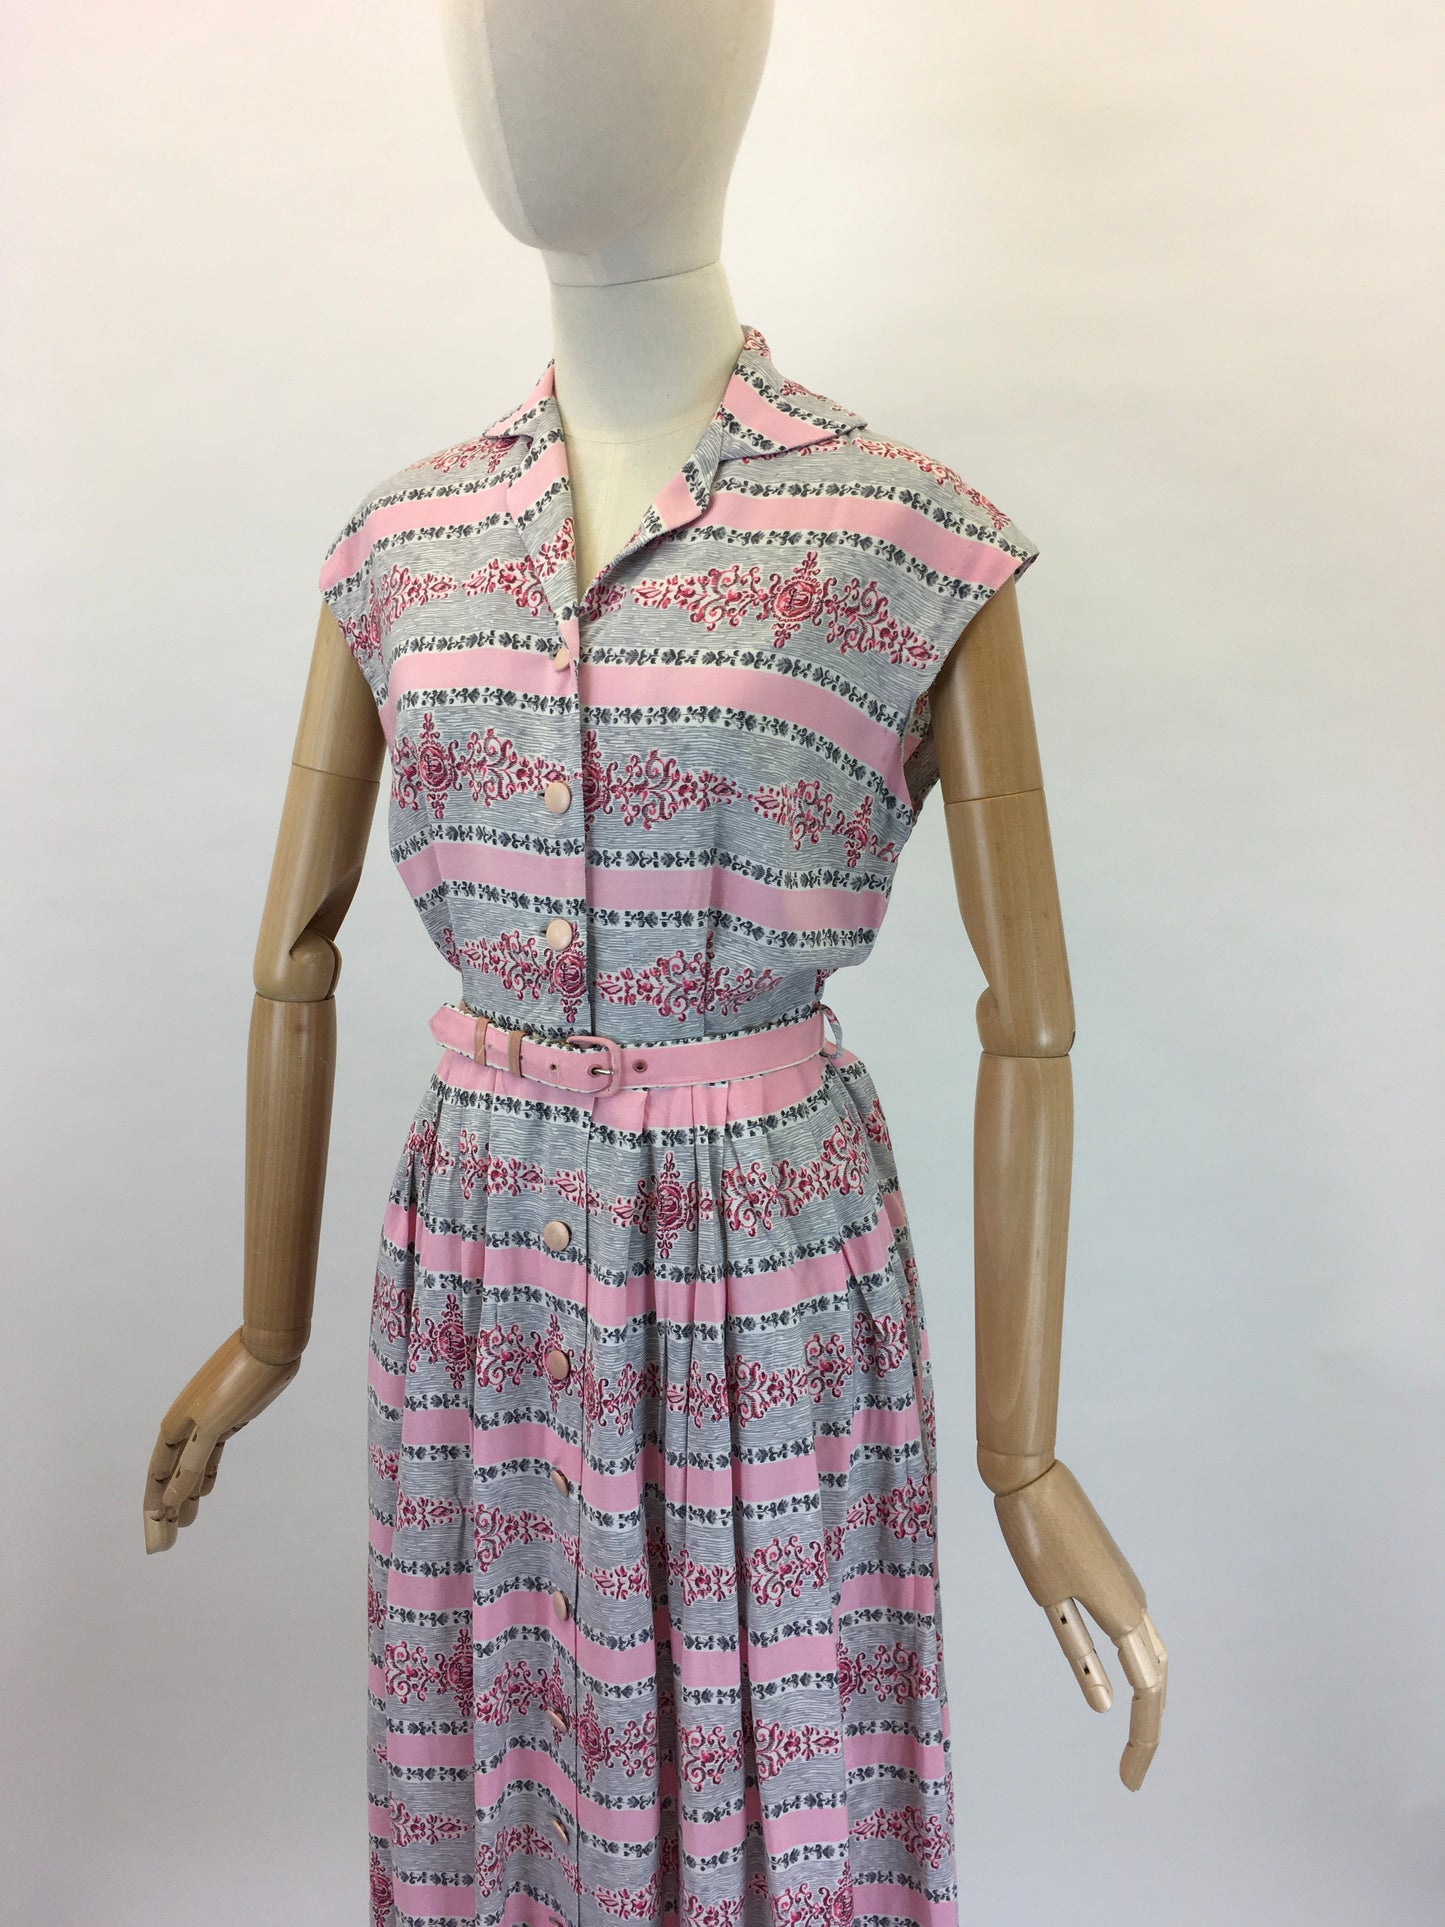 Original 1950s St. Michael Cotton Day Dress - In a lovely Pink and Grey Print